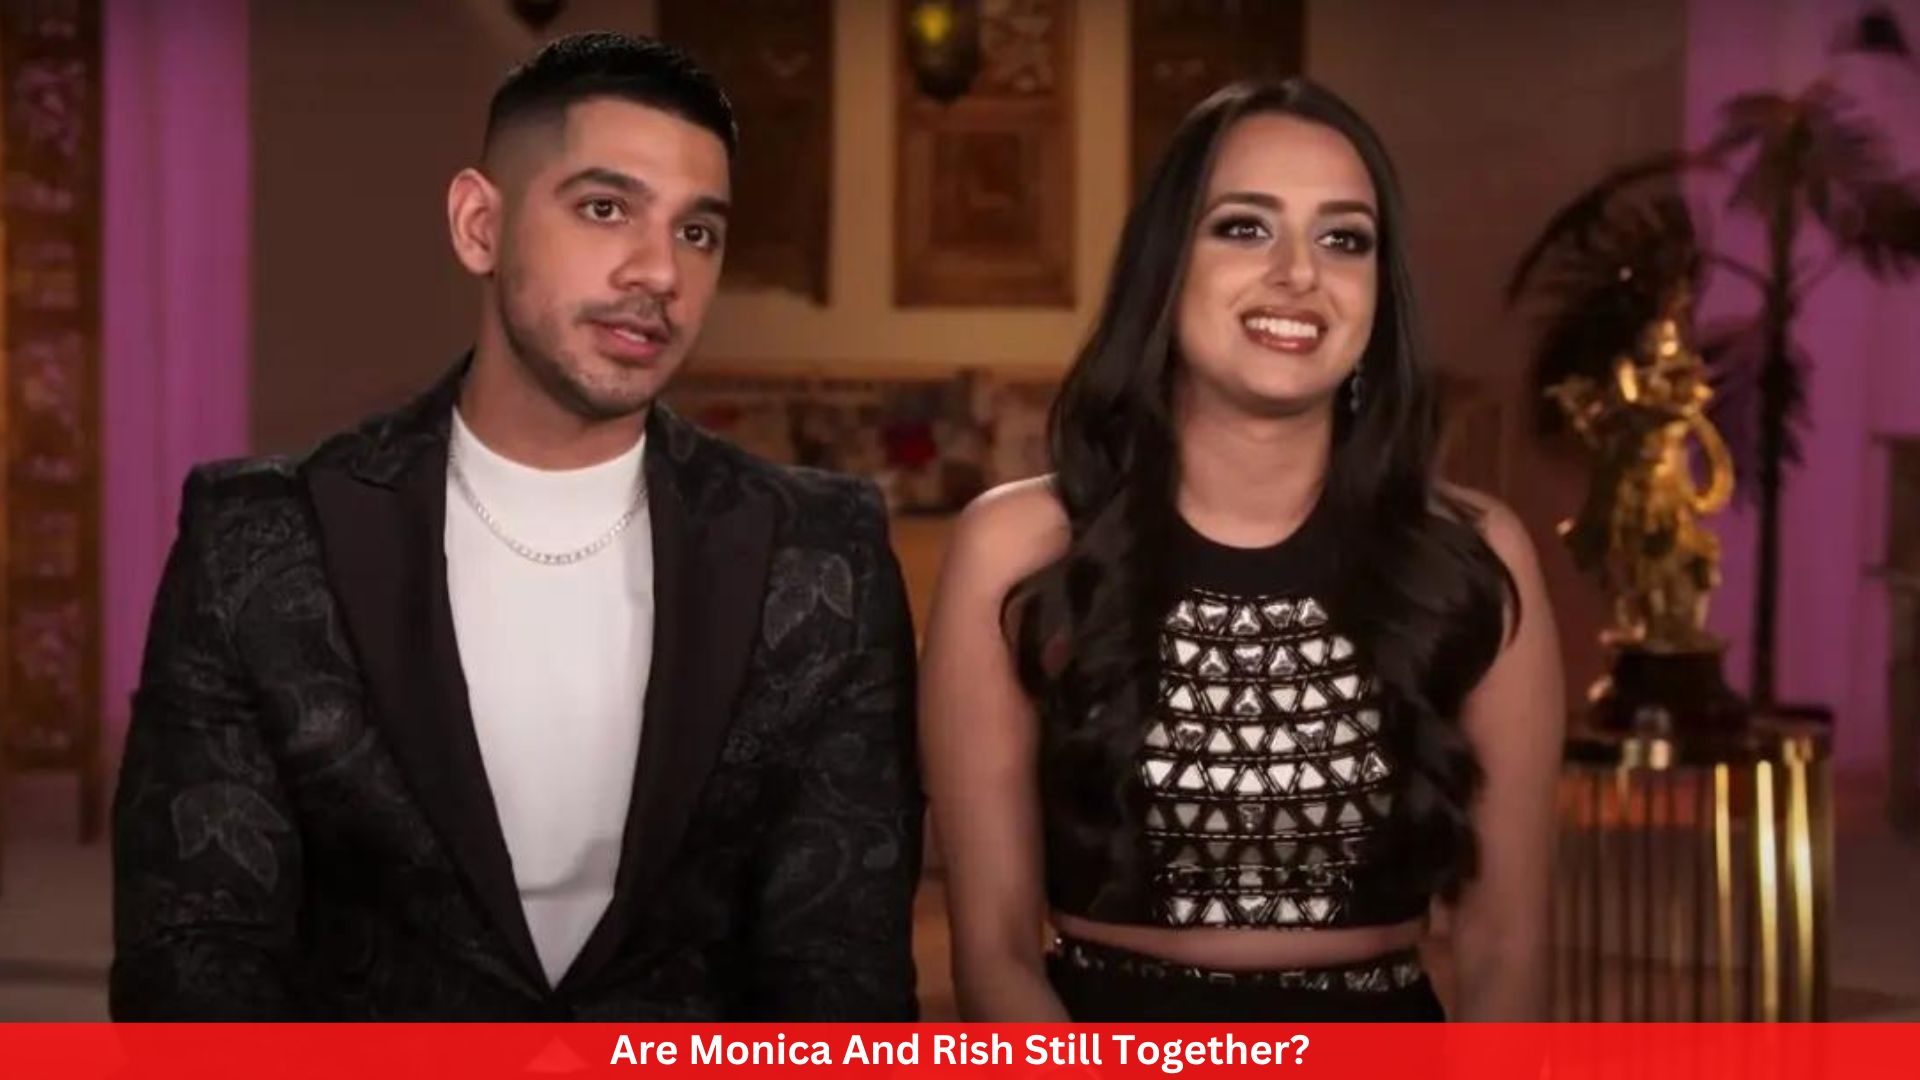 Are Monica And Rish Still Together?